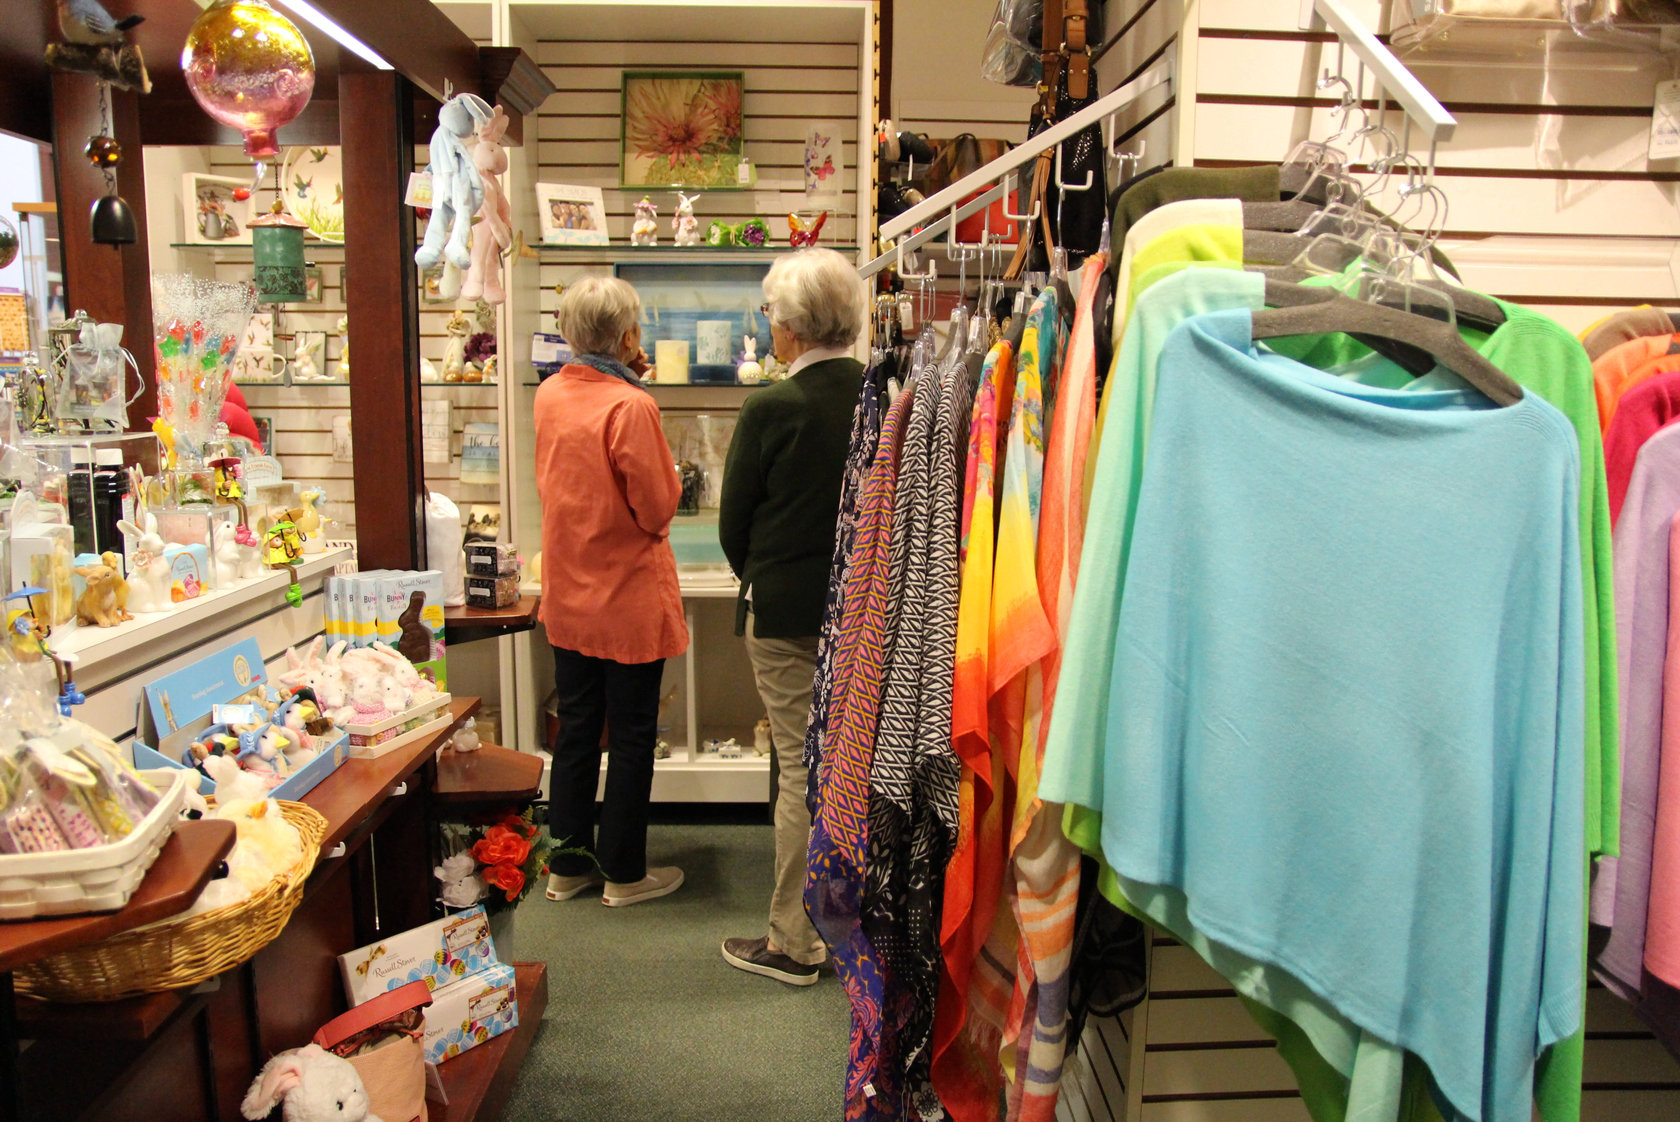 A volunteer assists a customer in the Greenwich Hospital Gift Shop. April 10, 2019 Photo: Leslie Yager